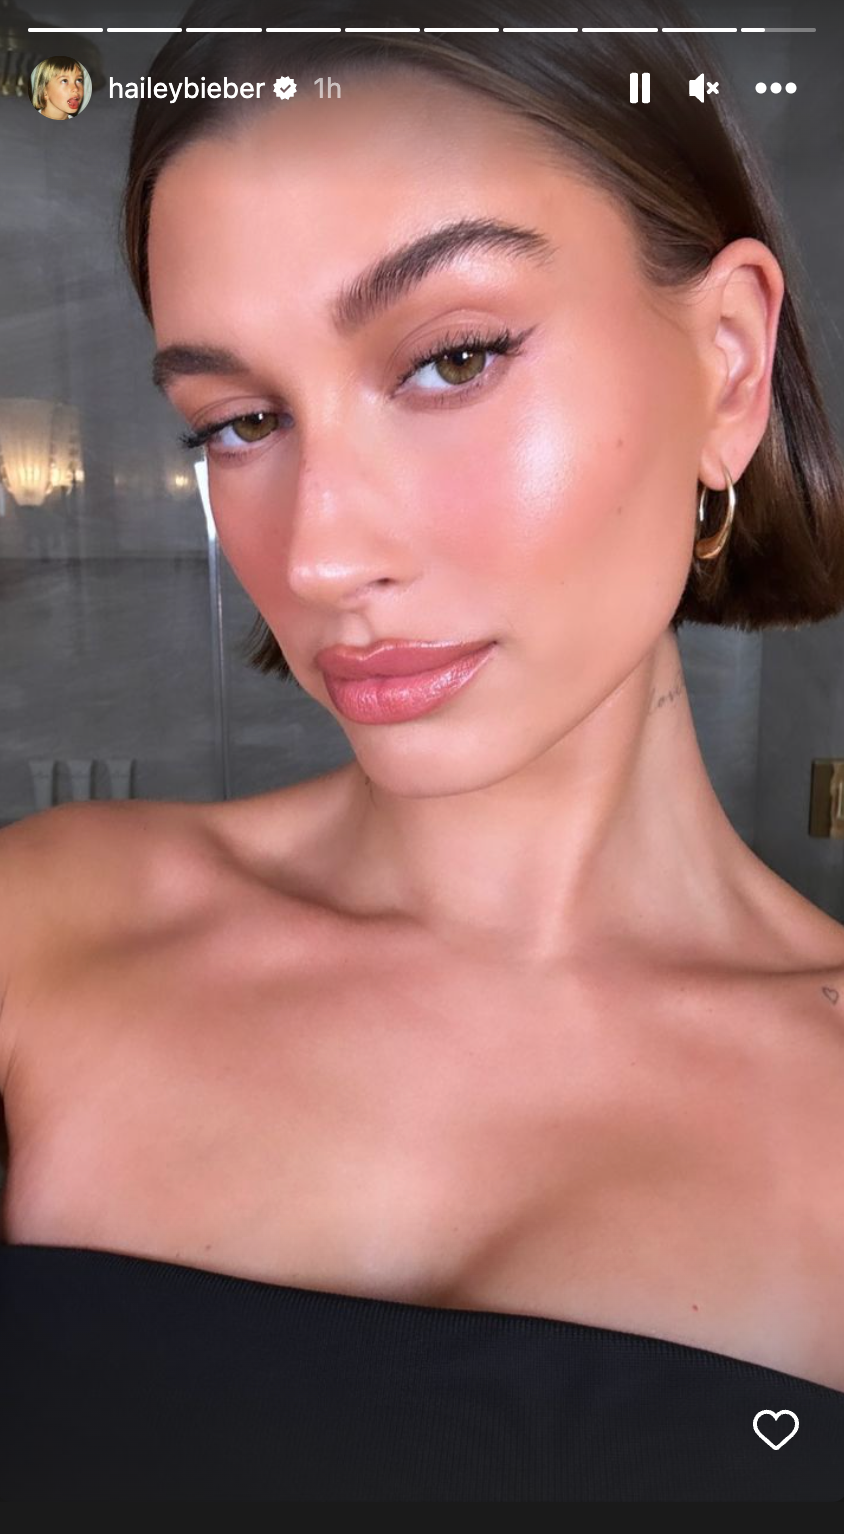 Hailey Bieber serves face in new post